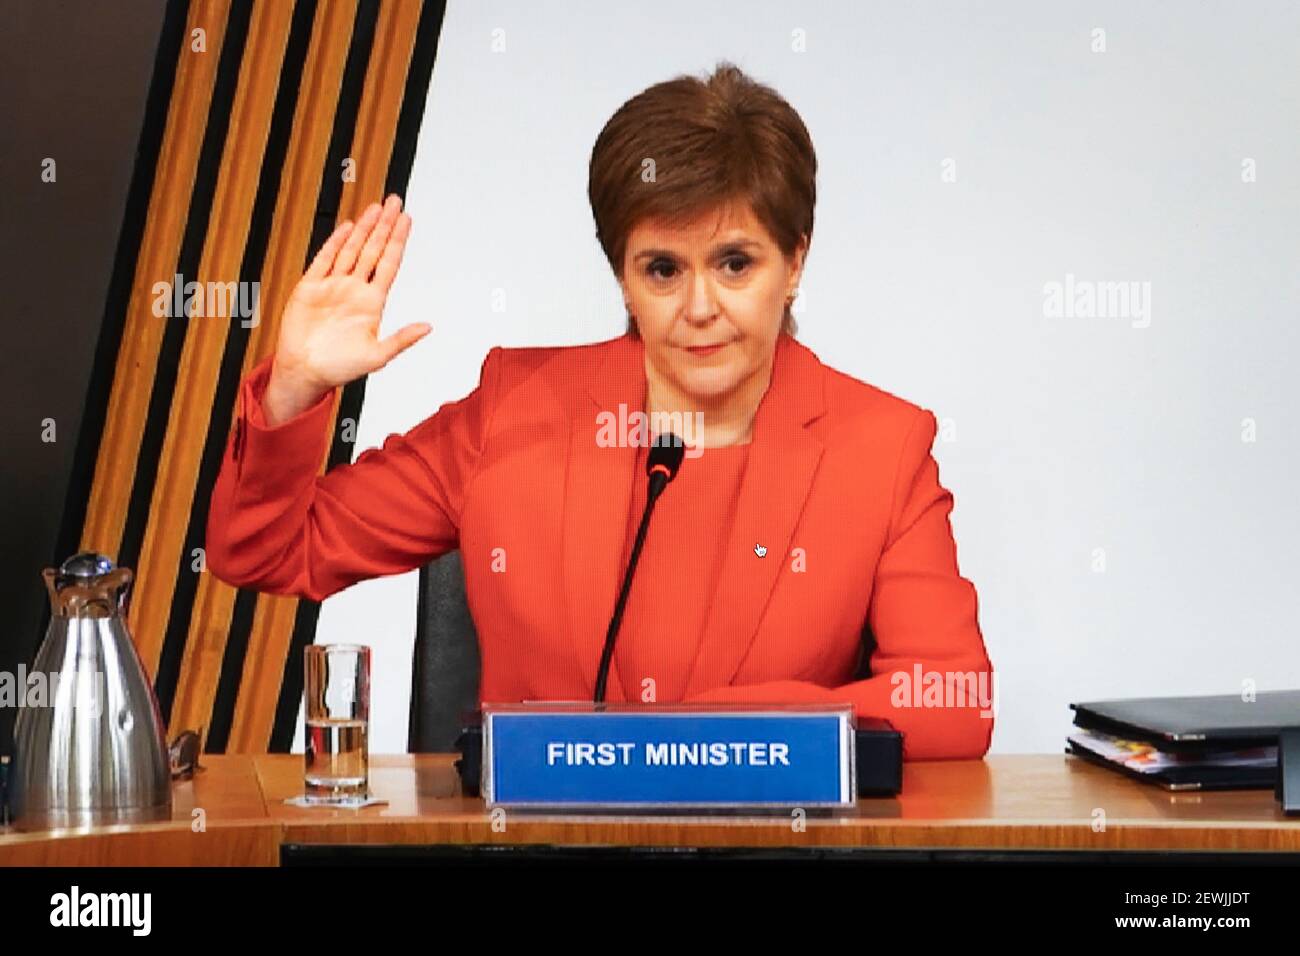 Edinburgh, Scotland, UK. 3 Mar 2021. Live streaming of First Minister of Scotland Nicola Sturgeon at Scottish Parliament in Edinburgh to give testimony to the Committee on the Scottish Government Handling of Harassment Complaints held by the Scottish Government . Iain Masterton/Alamy Live News Stock Photo